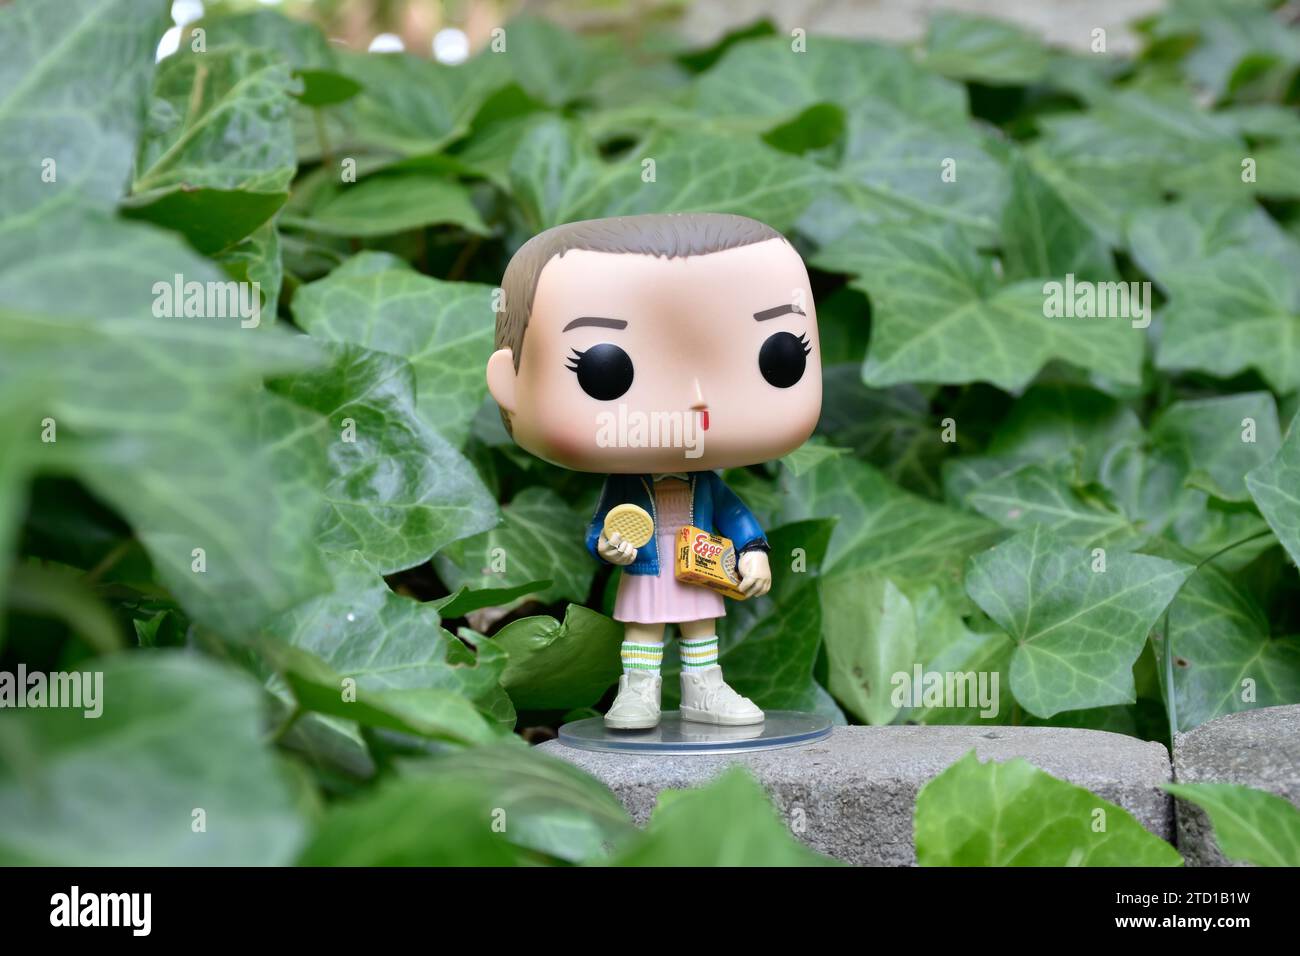 Funko Pop action figure of Eleven with Eggo waffles from Netflix TV series Stranger Things. Green ivy plant leaves, abandoned garden, mysterious mood. Stock Photo